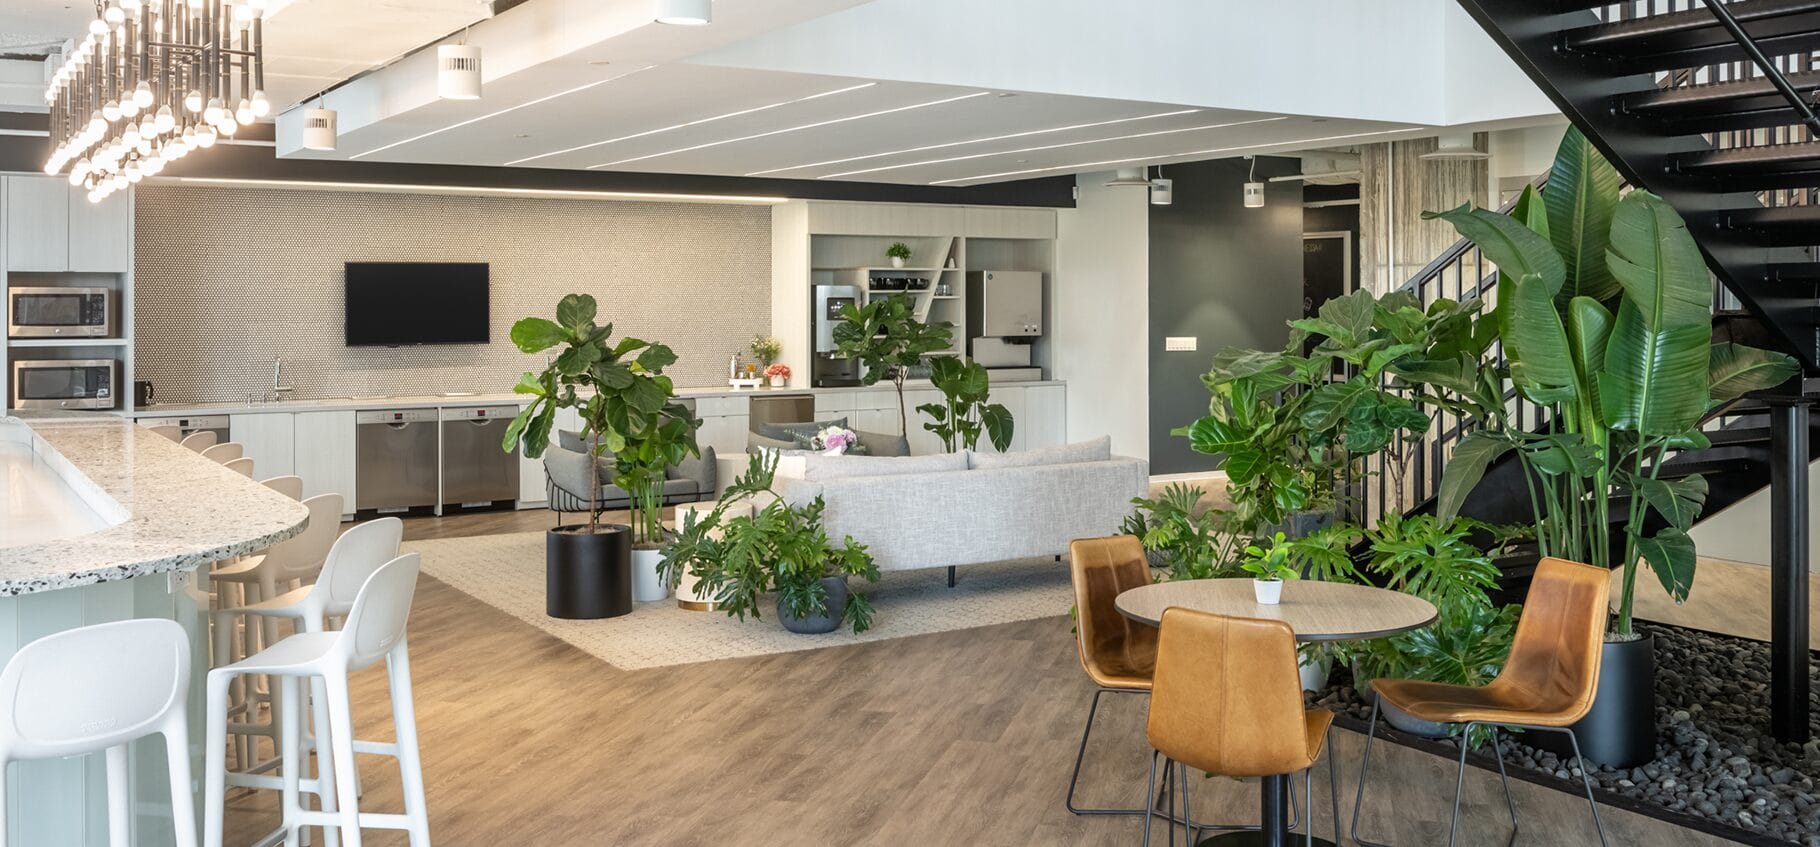 Interior coworking with plants, kitchen, TV, bar-style seating and stairs to second floor